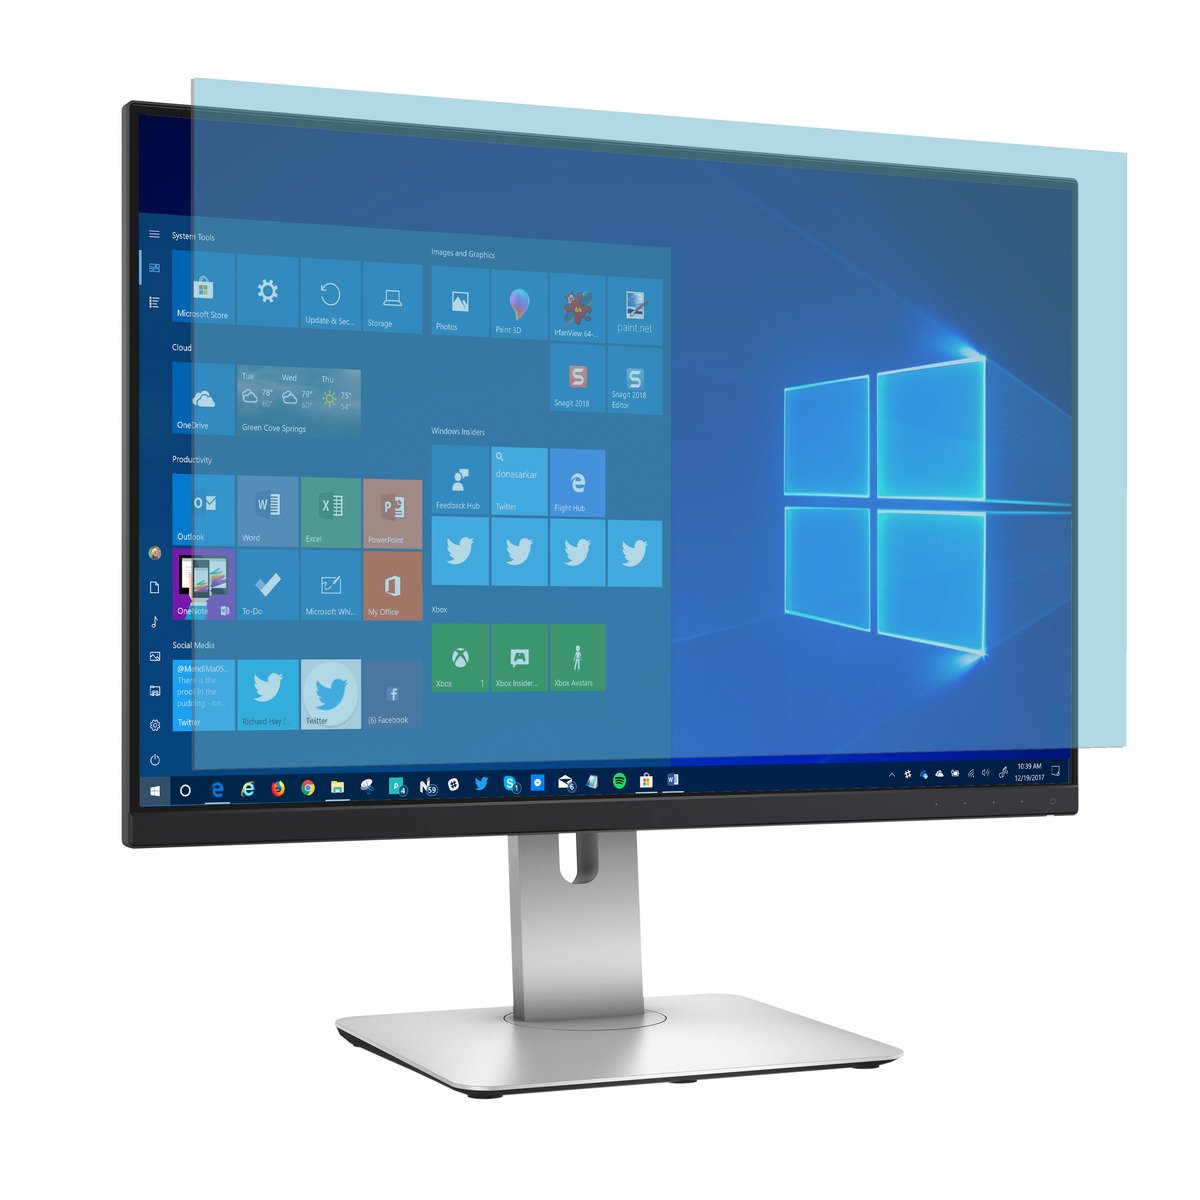 Targus Blue Light Filter And Anti-glare Screen Protector For 23.8 Widescreen Monitors (16:9)